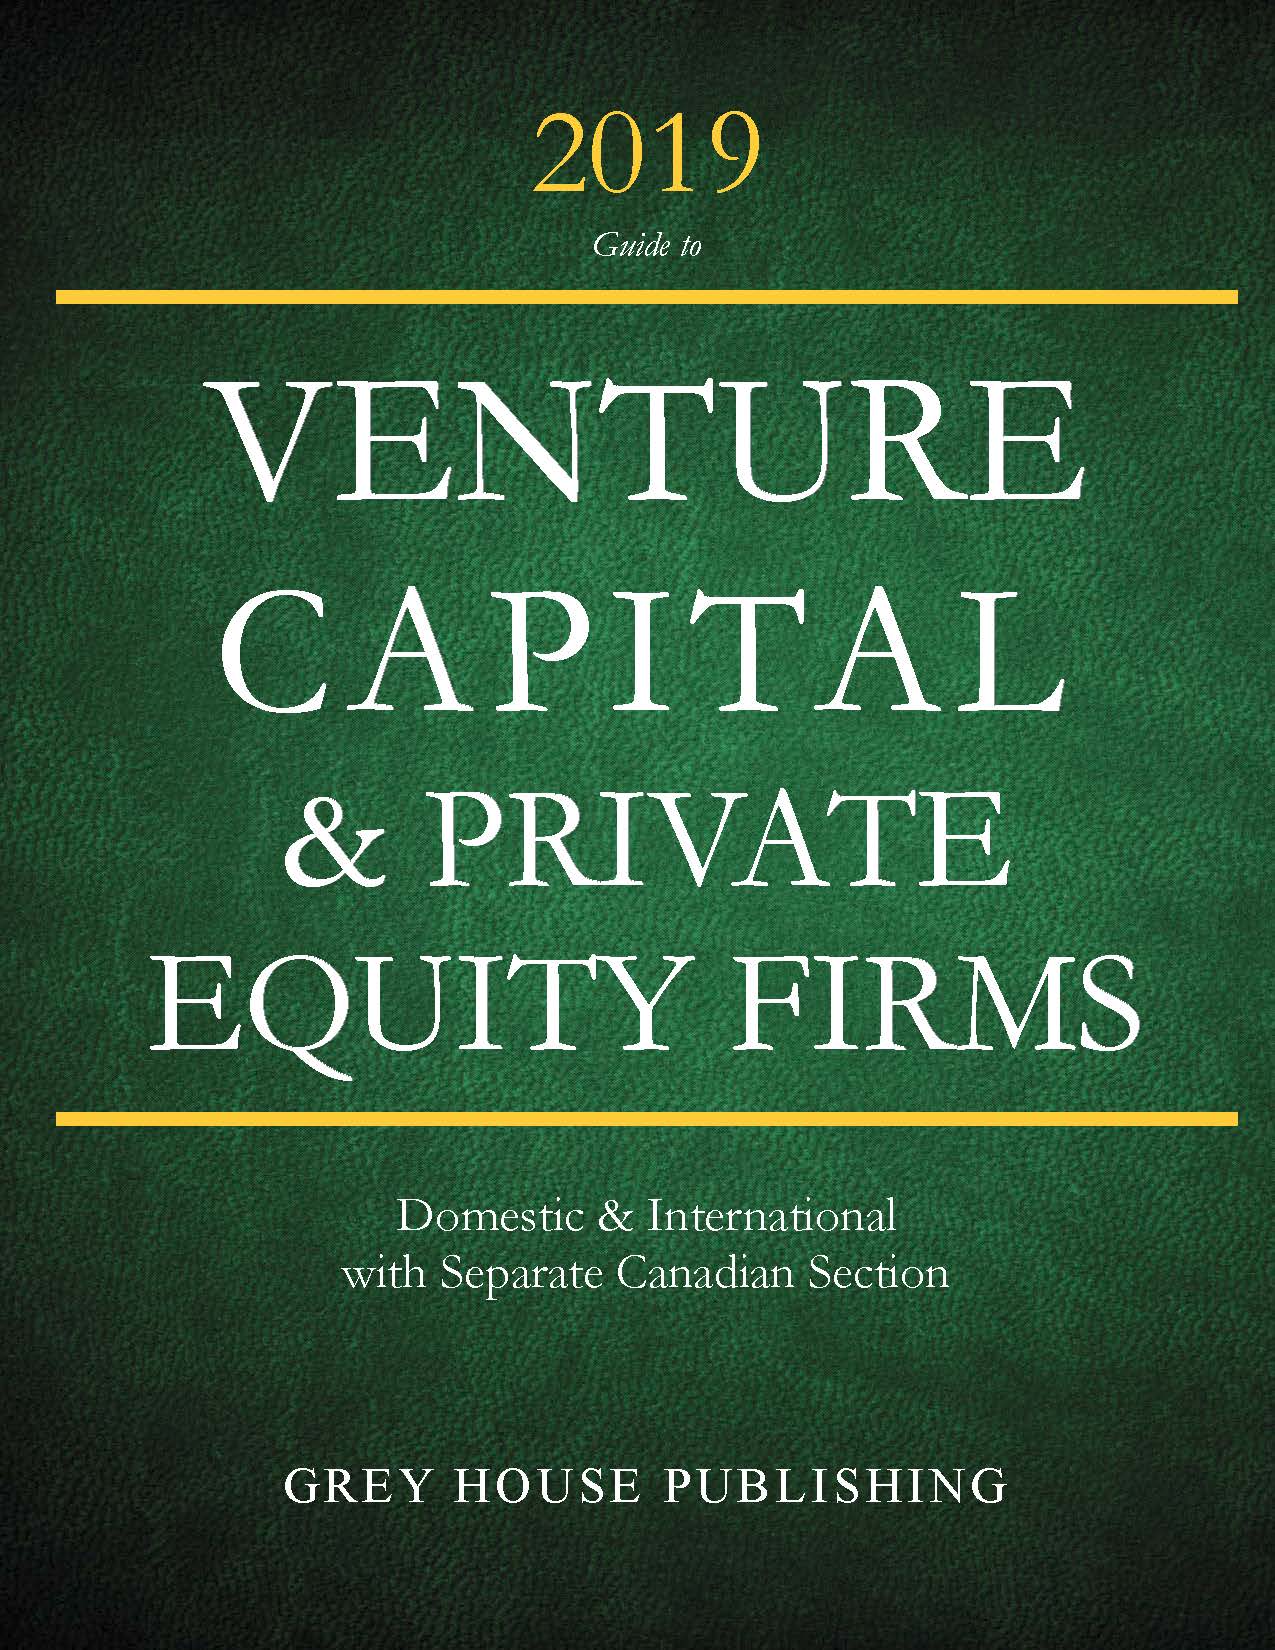 Guide to of Venture Capital & Private Equity Firms